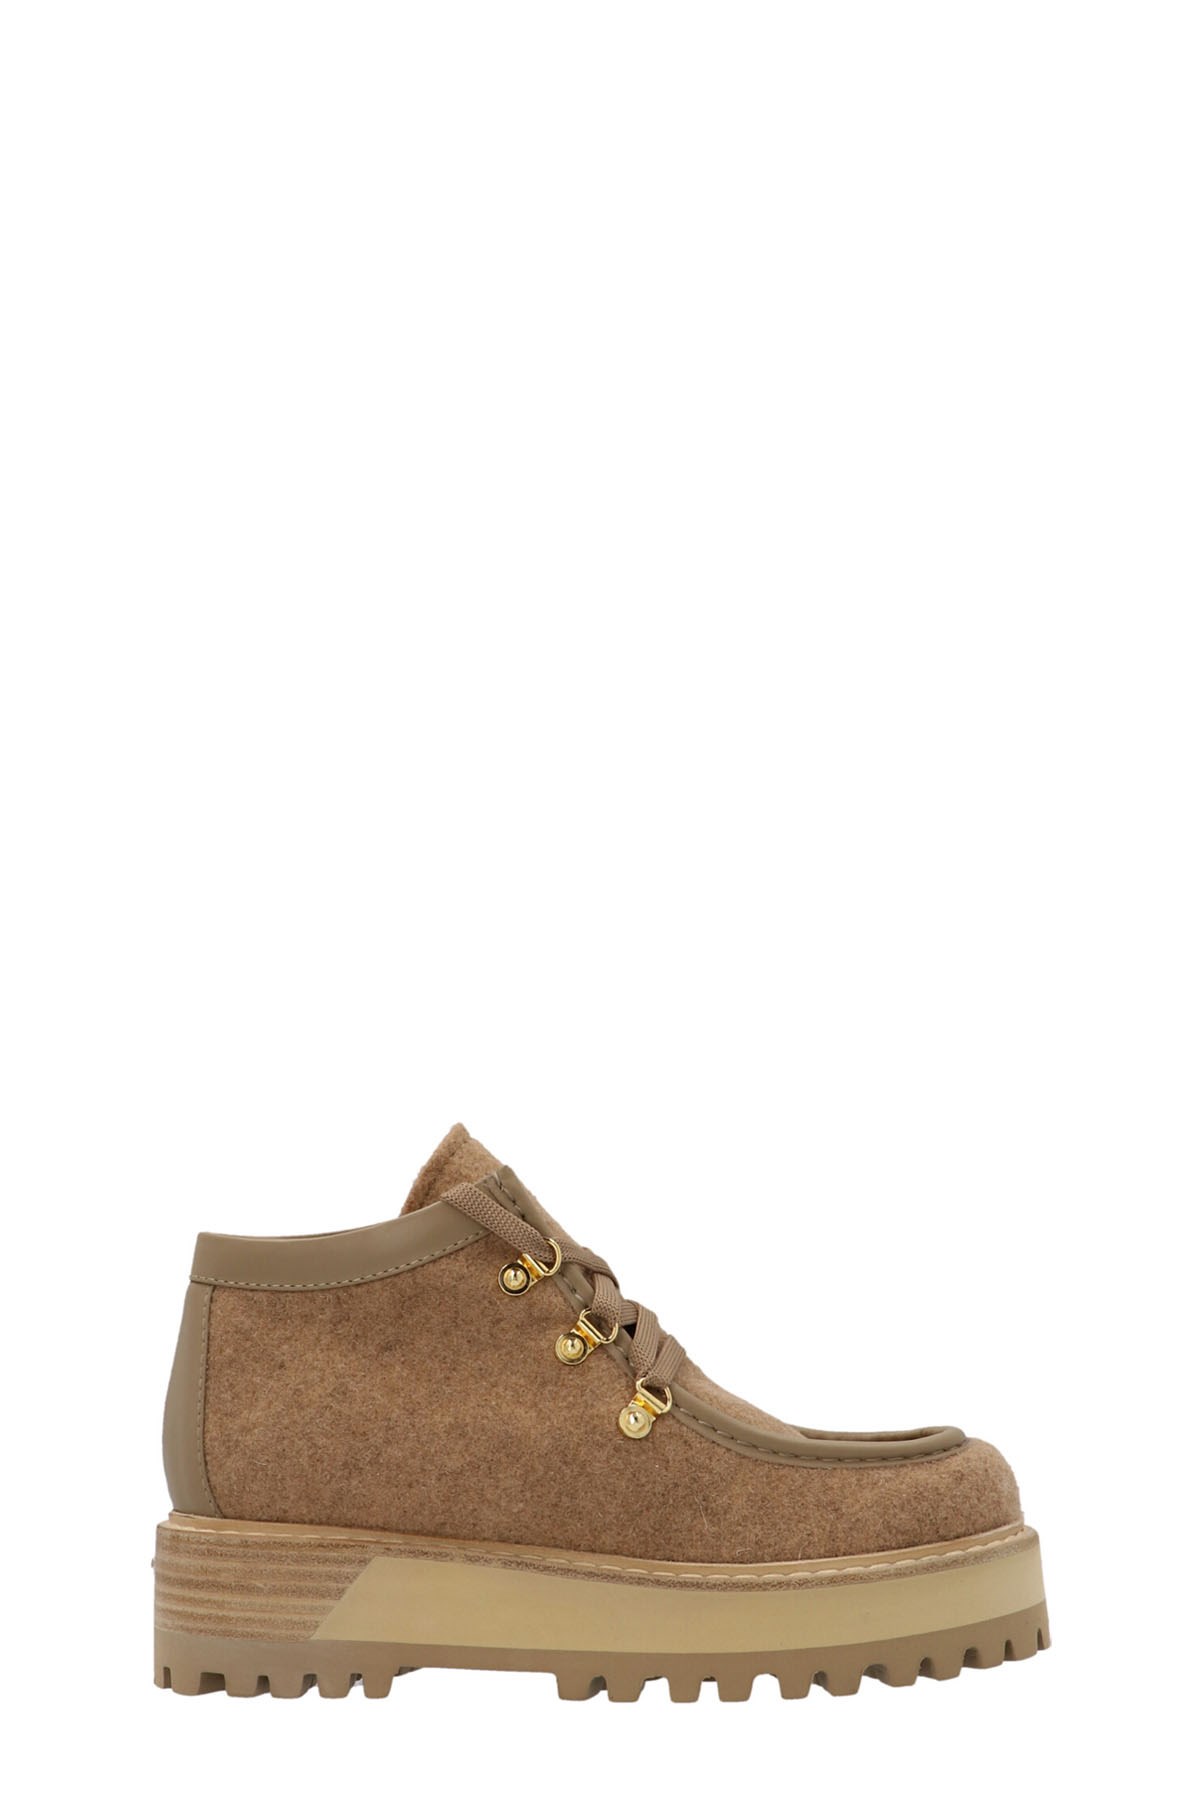 LE SILLA 'Margot’ Ankle Boots